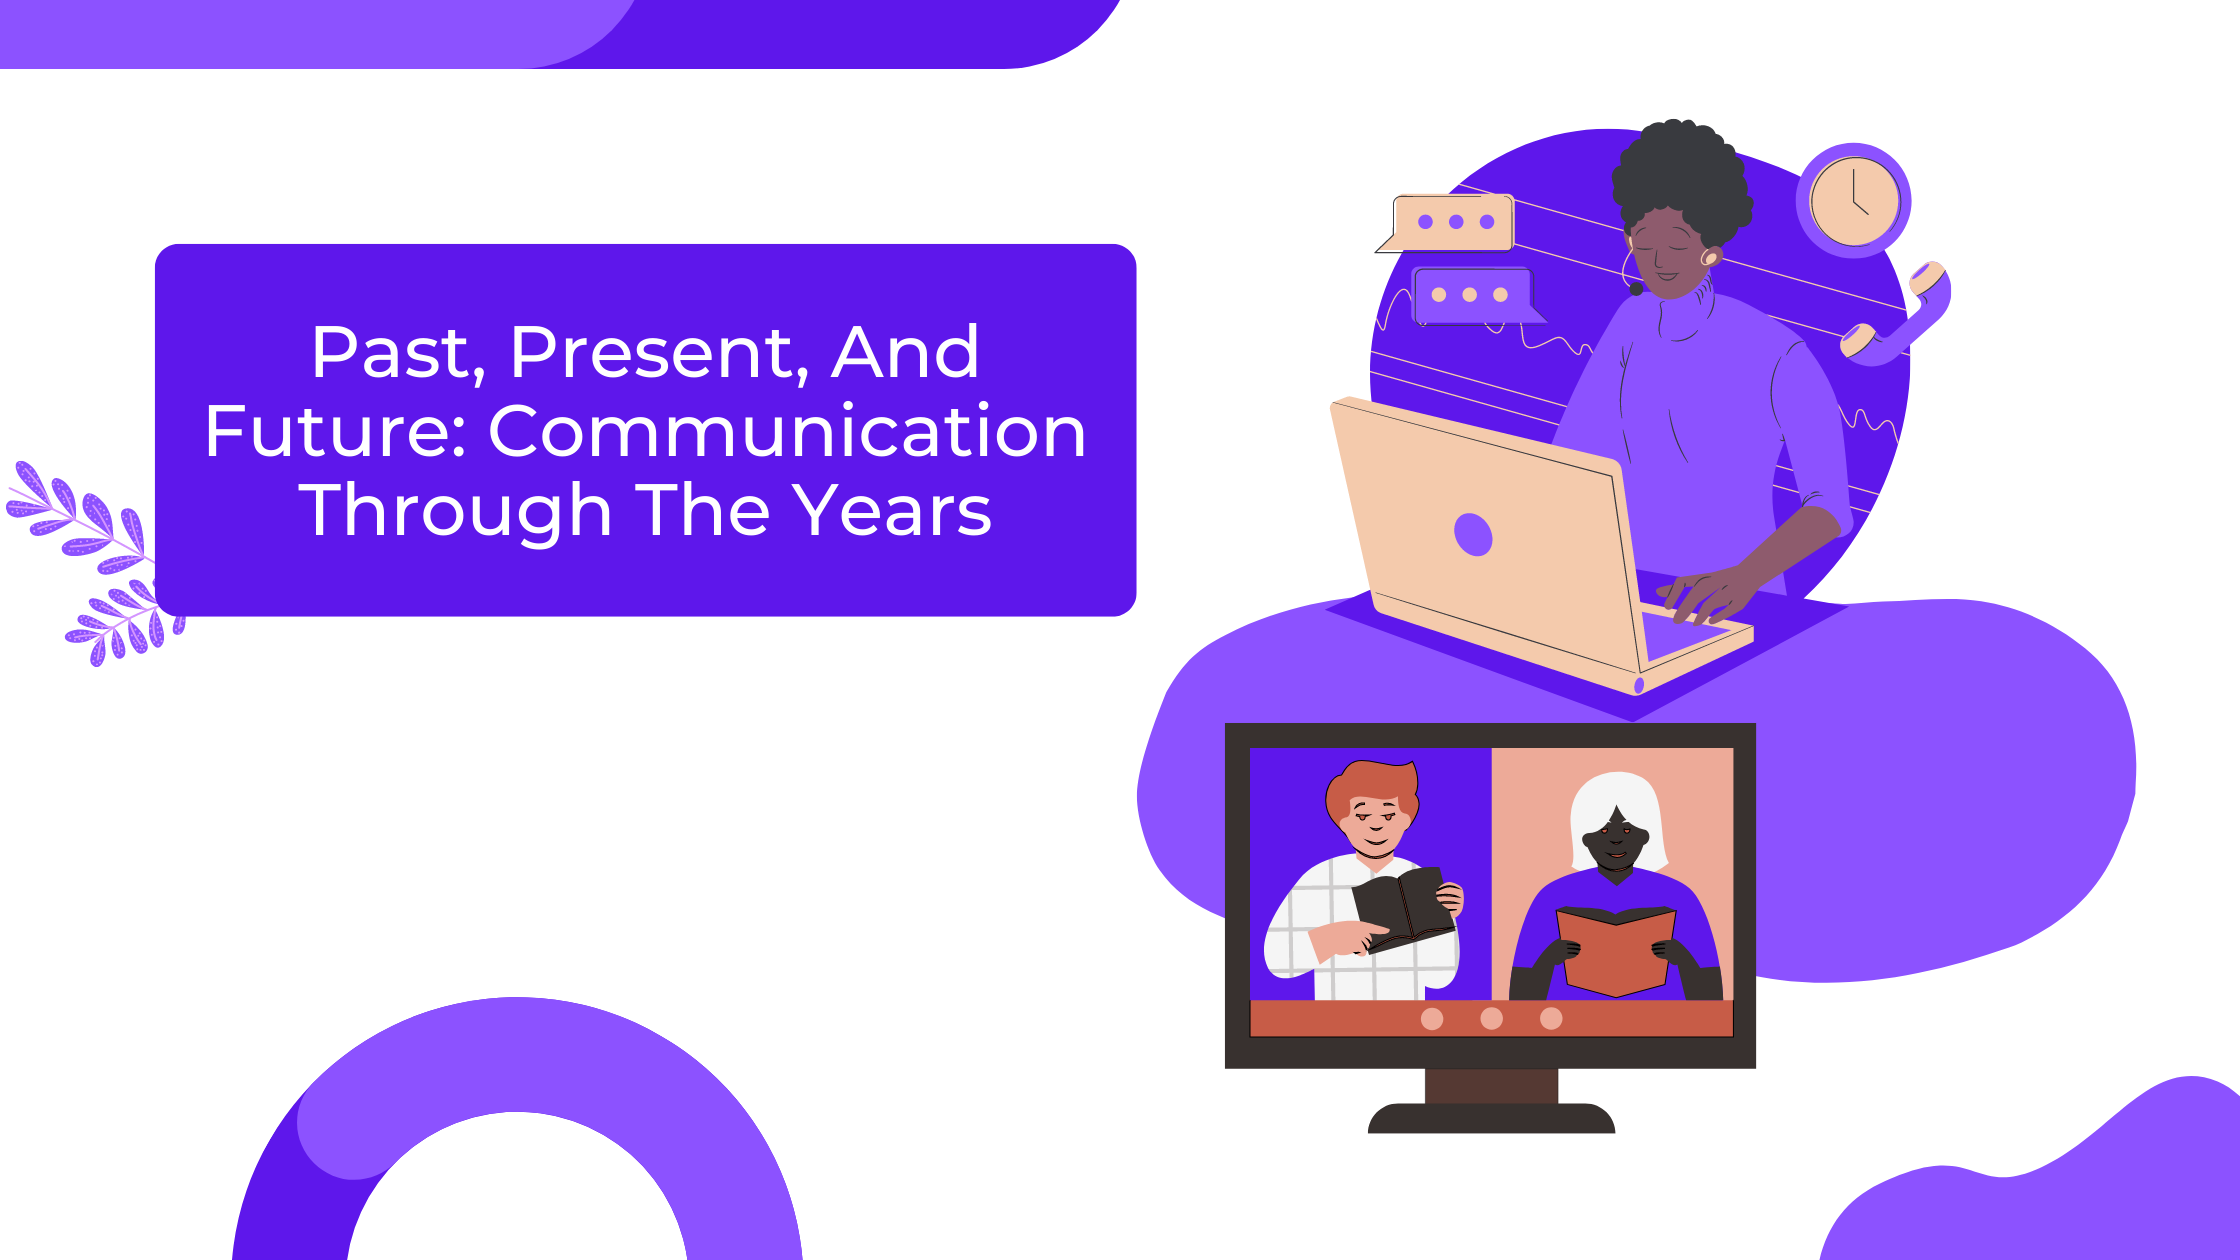 Past, Present, And Future Communication Through The Years